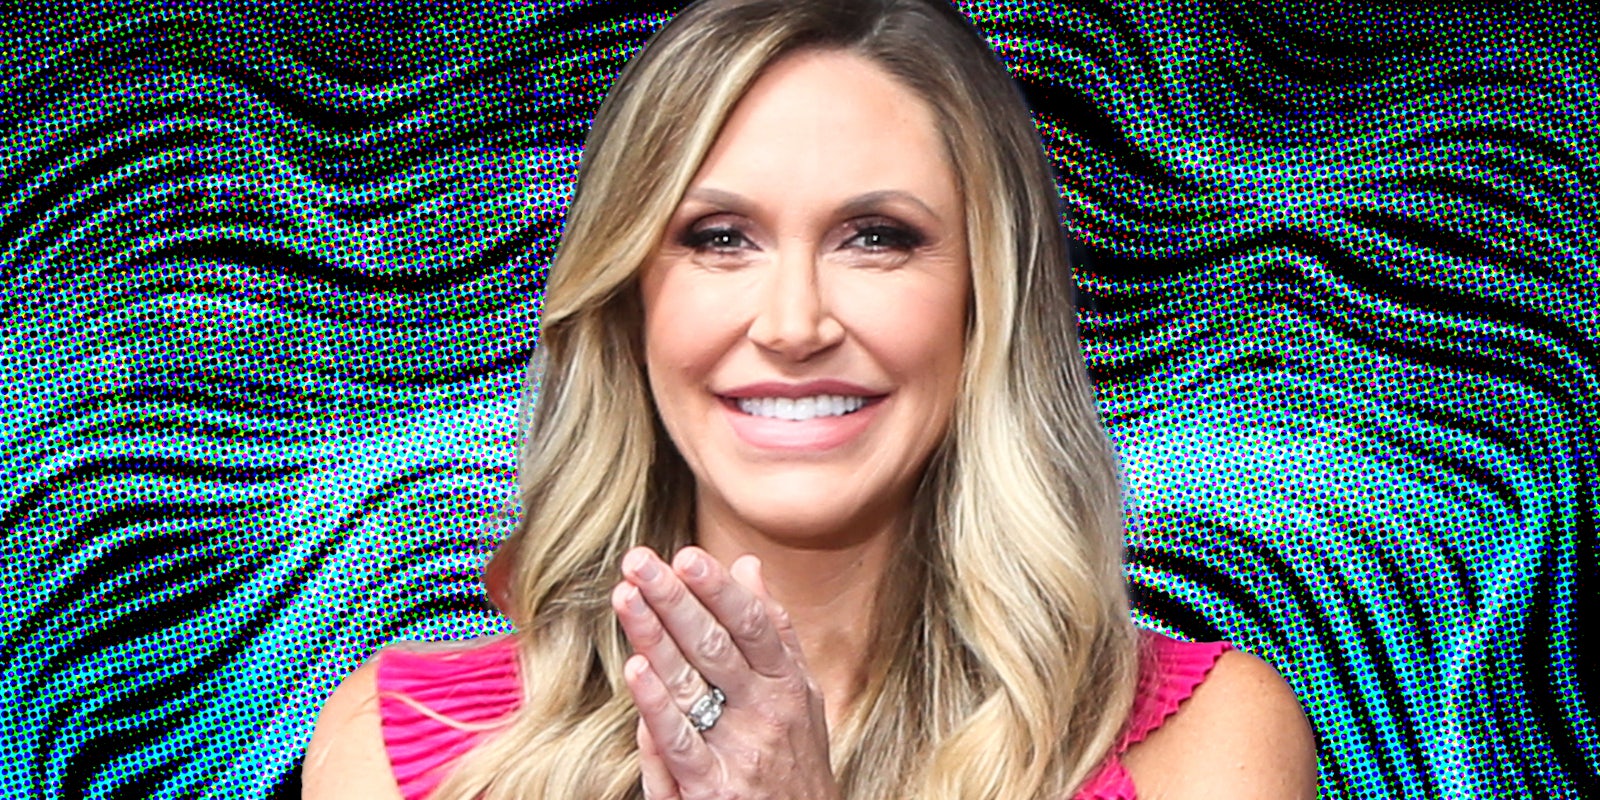 Lara Trump in front of graphic background